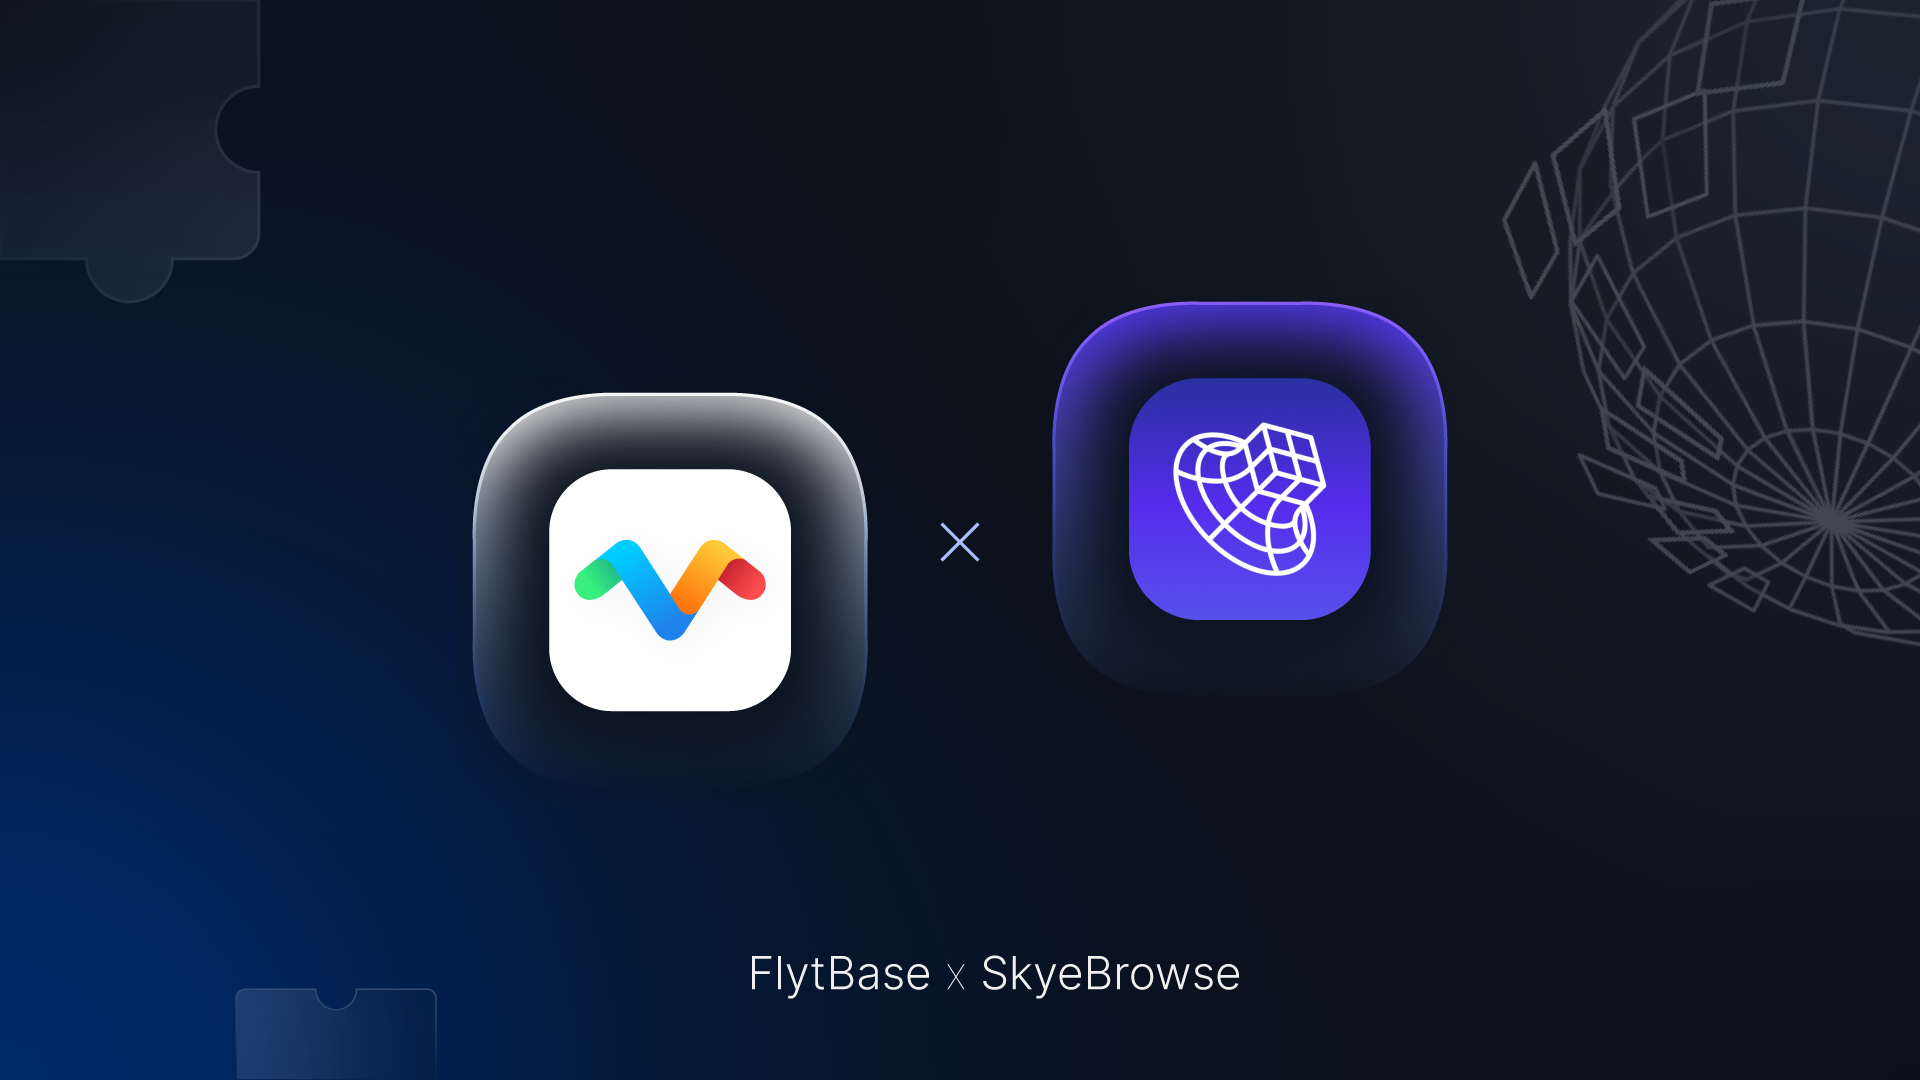 FlytBase partners with SkyeBrowse for rapid drone data capture, 3D modeling